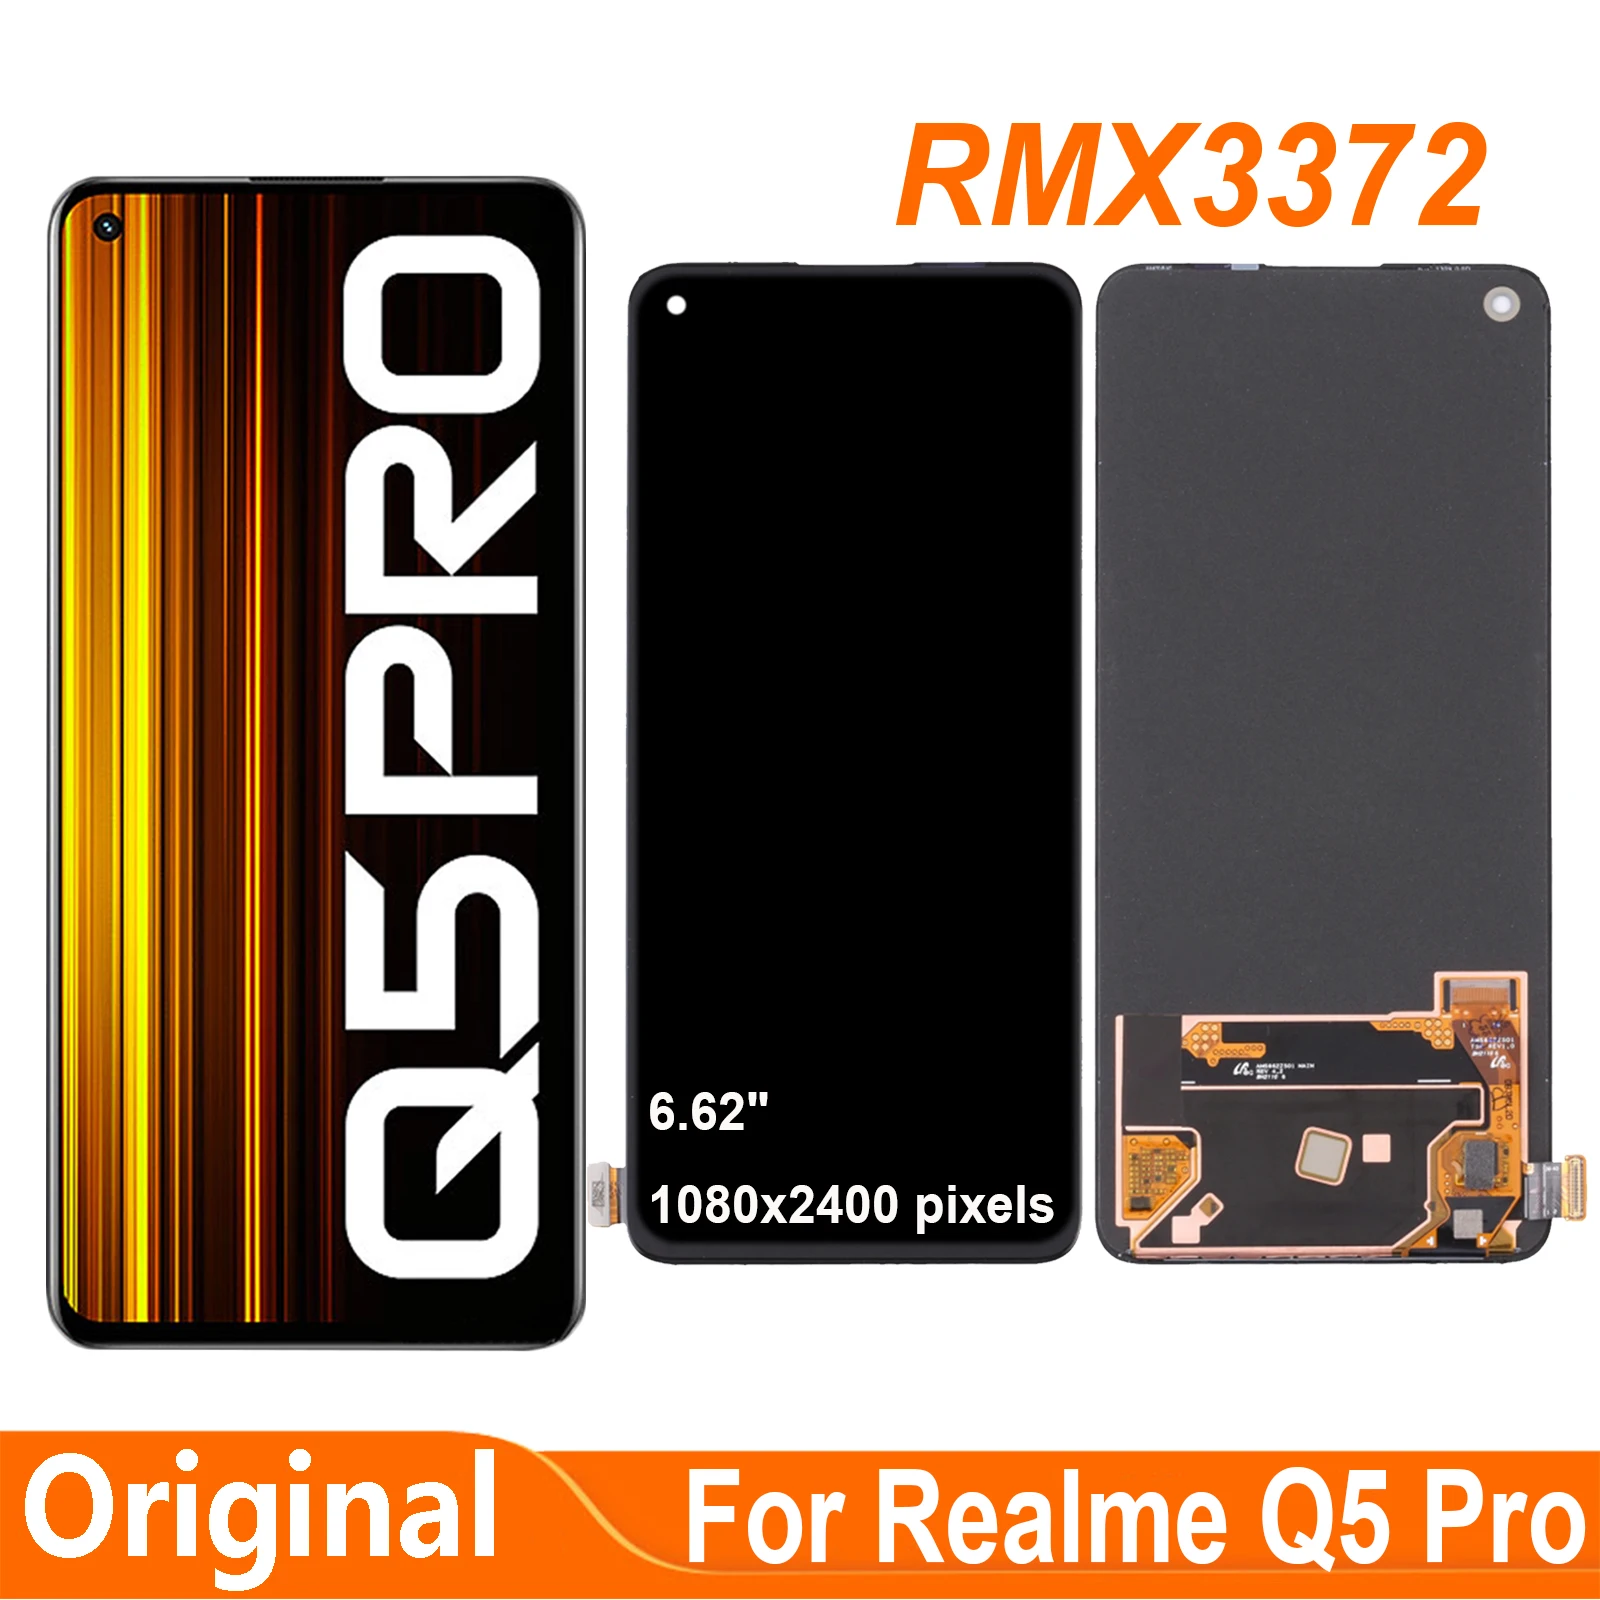 

Original 6.62'' AMOLED For OPPO Realme Q5 Pro Q5Pro RMX3372 LCD Display Touch Screen Replacement Digitizer Assembly